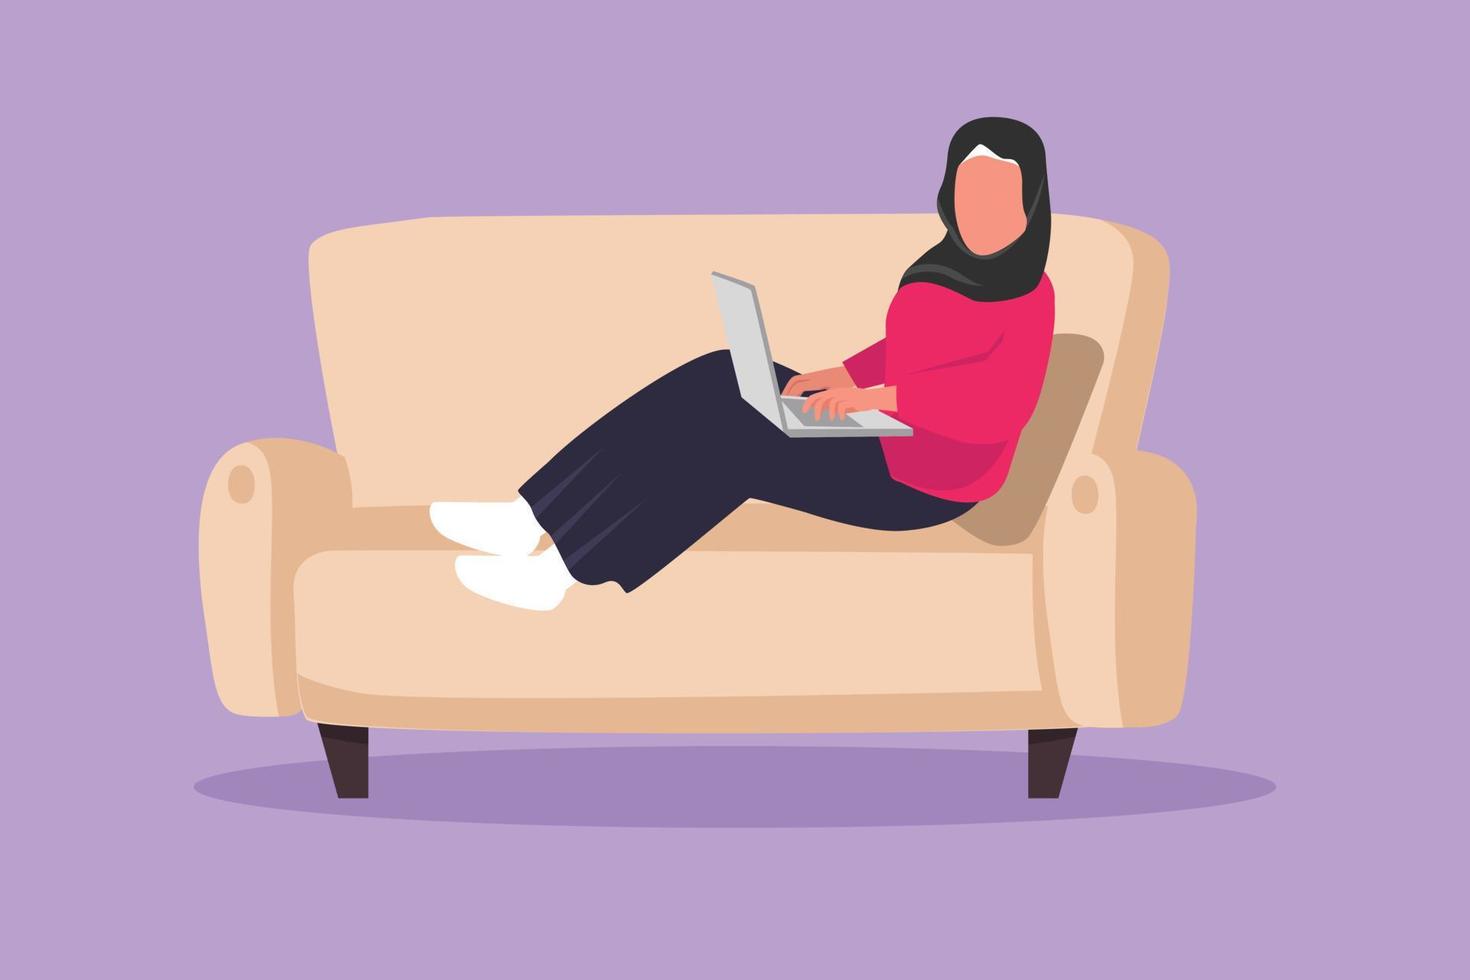 Character flat drawing beauty Arab woman sitting on couch and typing on laptop keyboard. Work from home with female using computer on sofa. Girl sitting comfortably. Cartoon design vector illustration